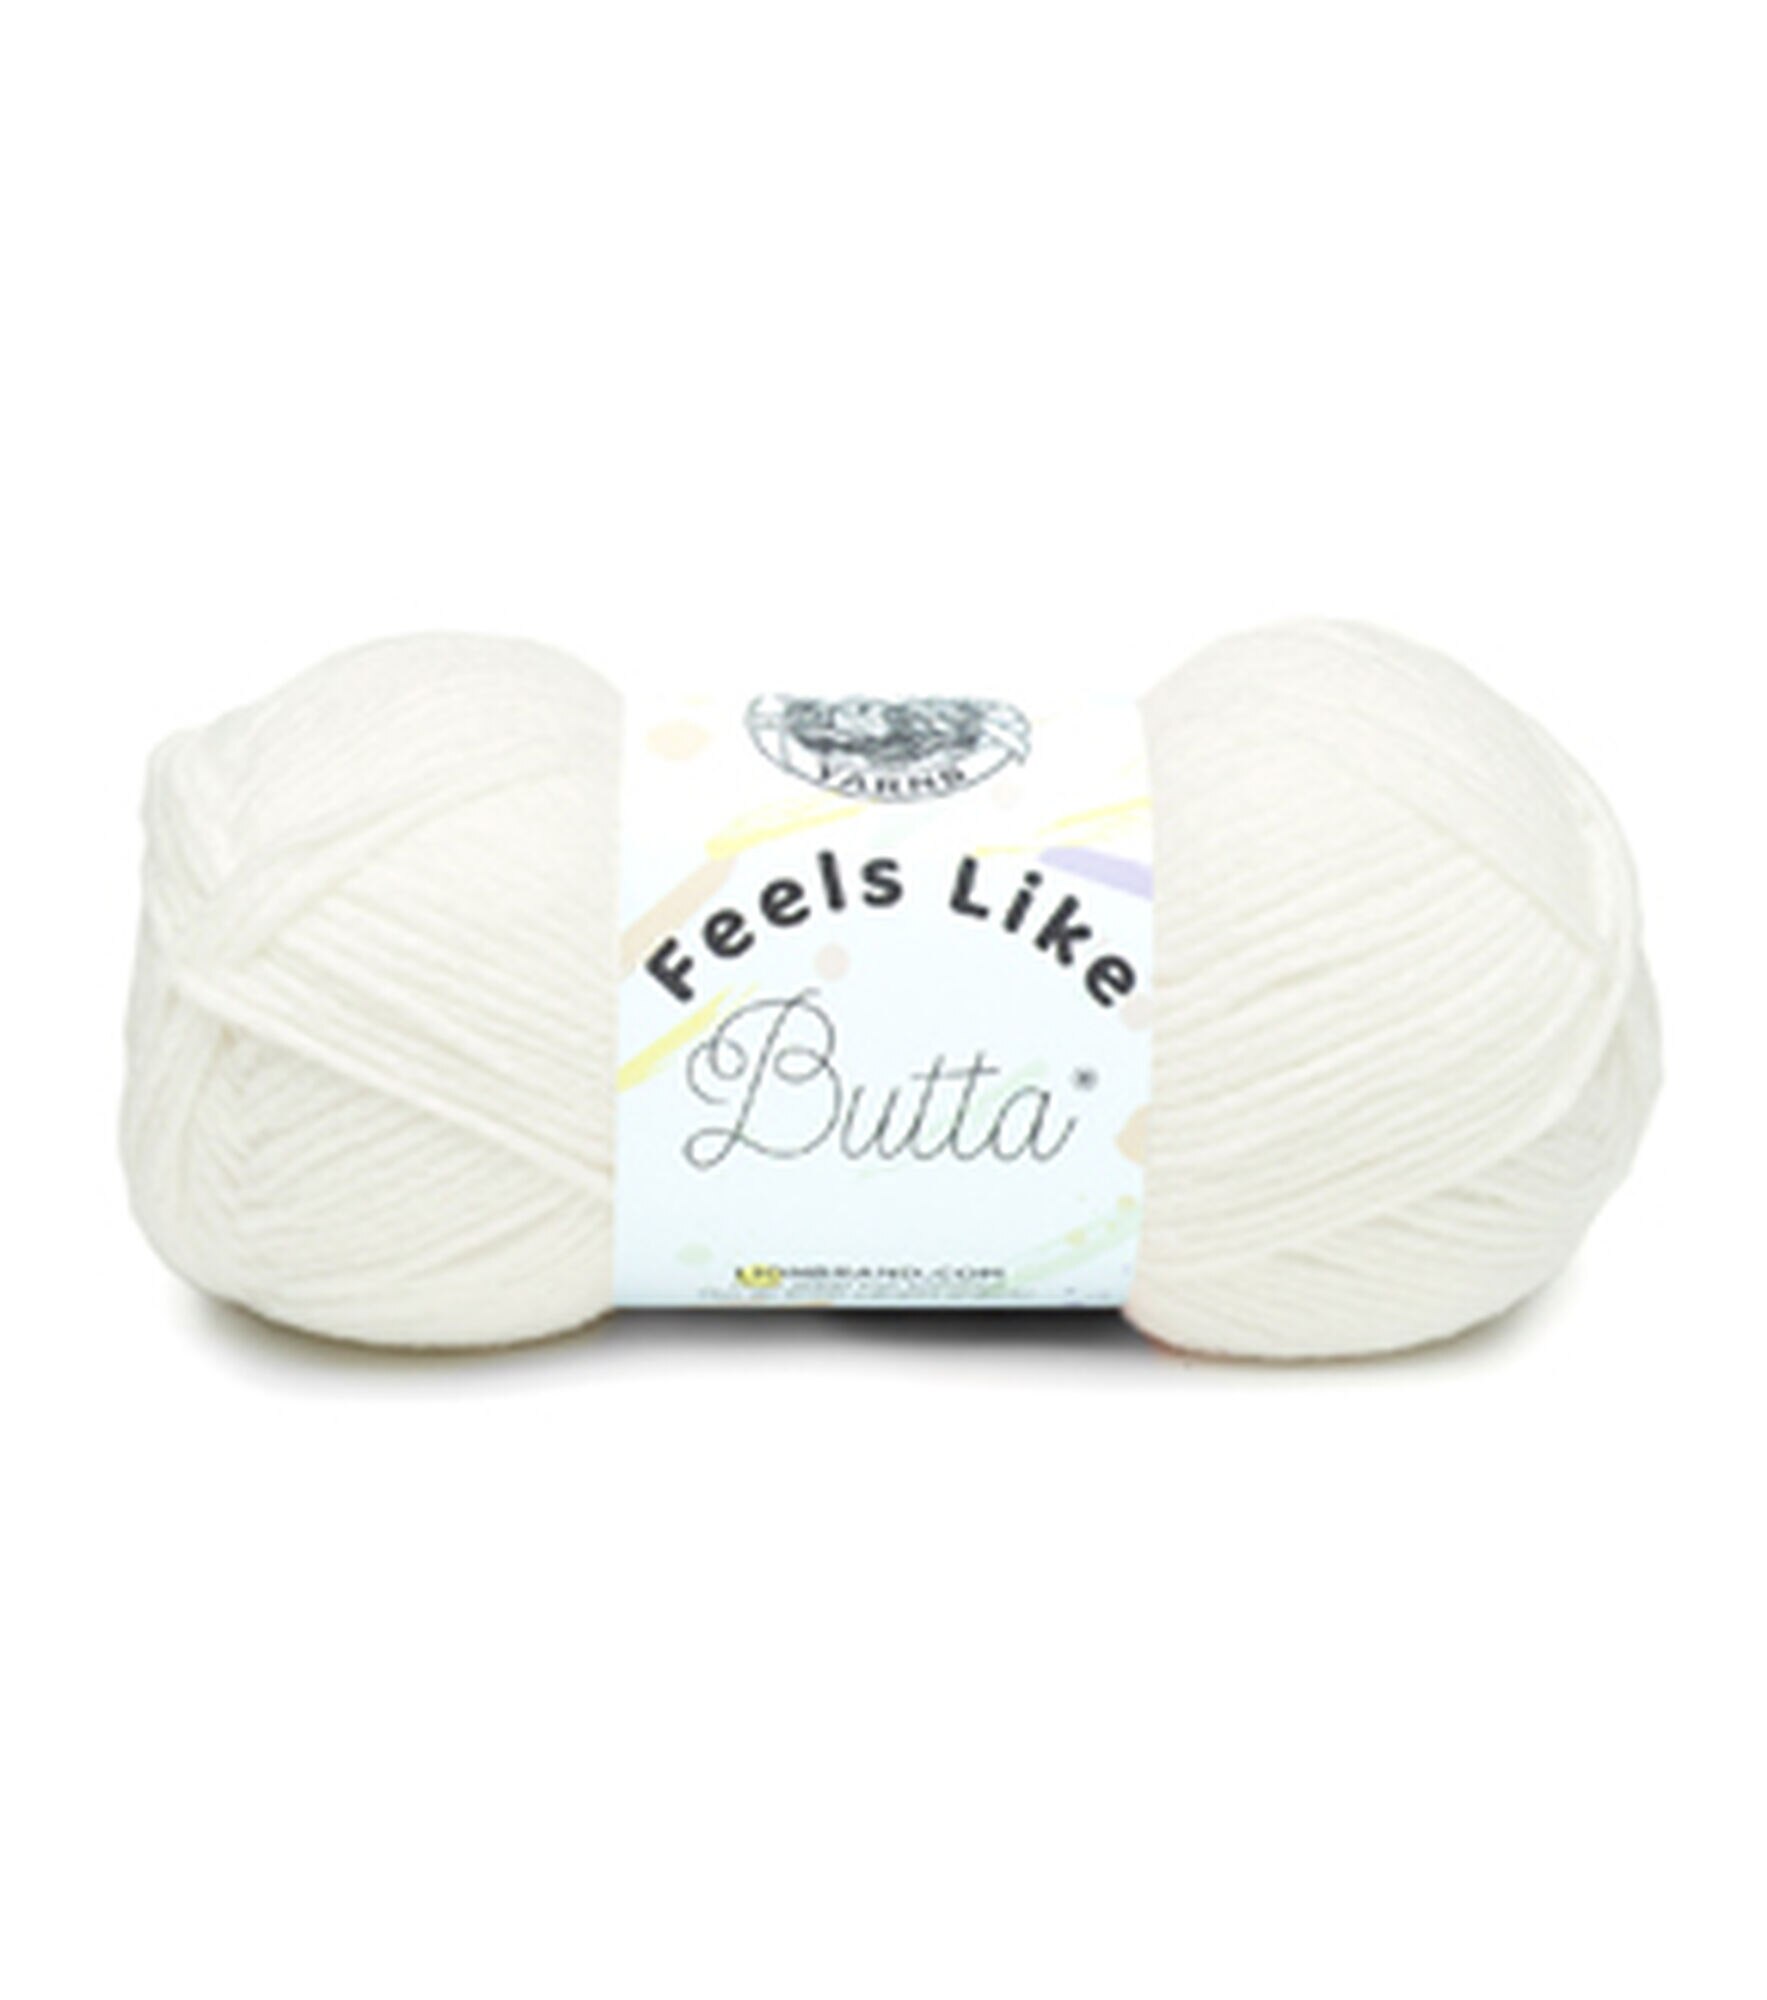 Lion Brand Baby Soft Yarn Light Pale Pink White Lot of 2 Skeins